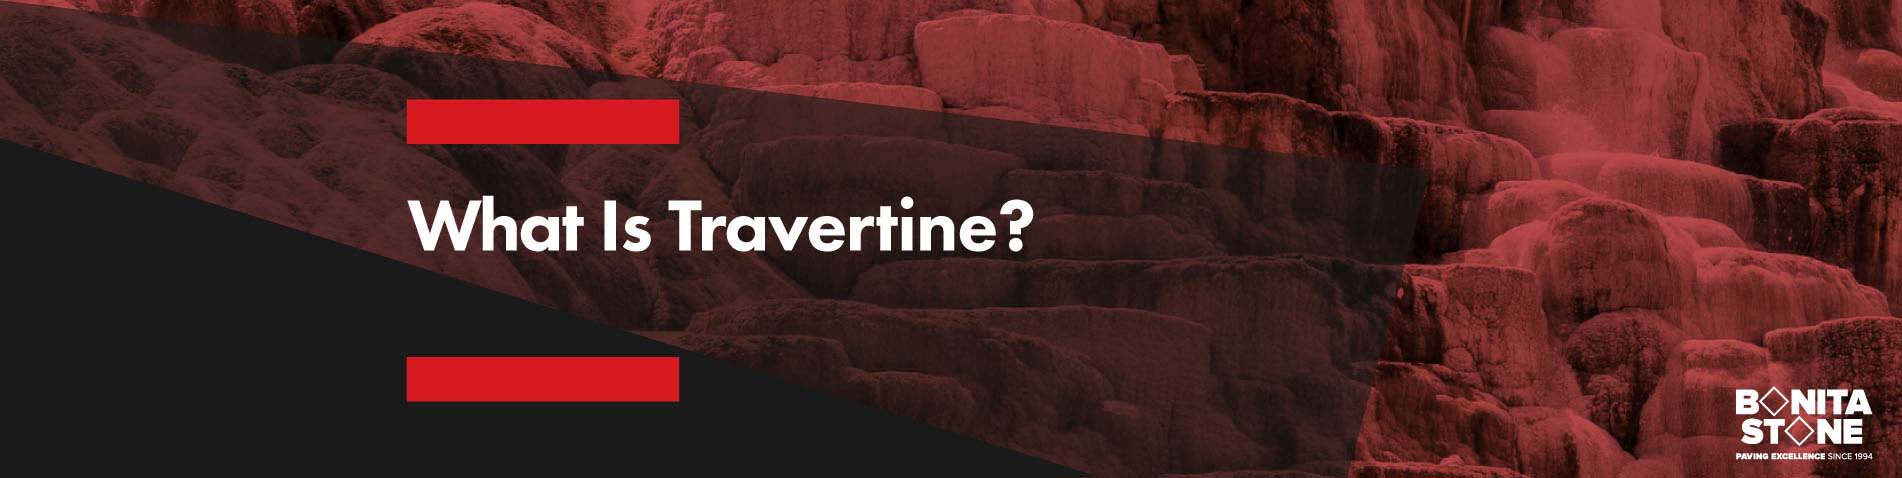 what-is-travertine-banner-updated_1